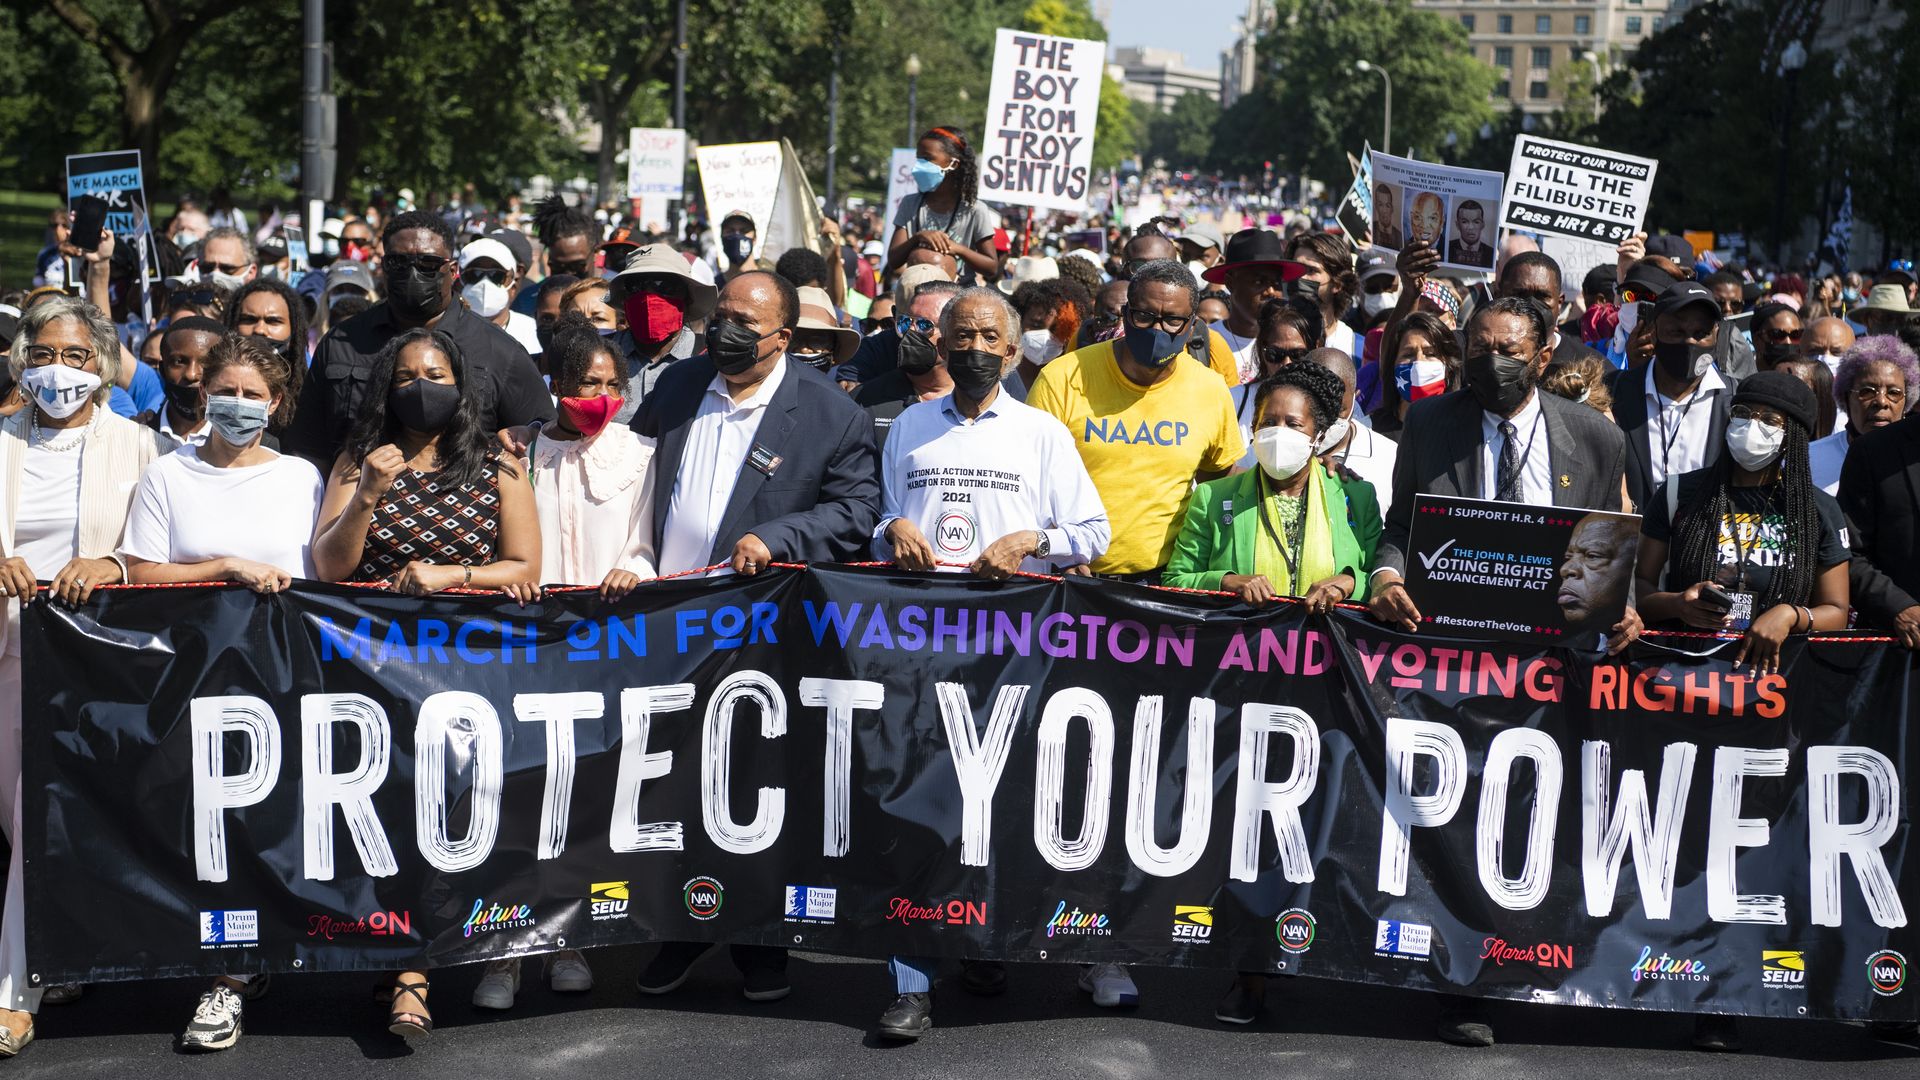 Photo of protesters holding a banner that says "Protect your power" as a crowd marches for voting rights